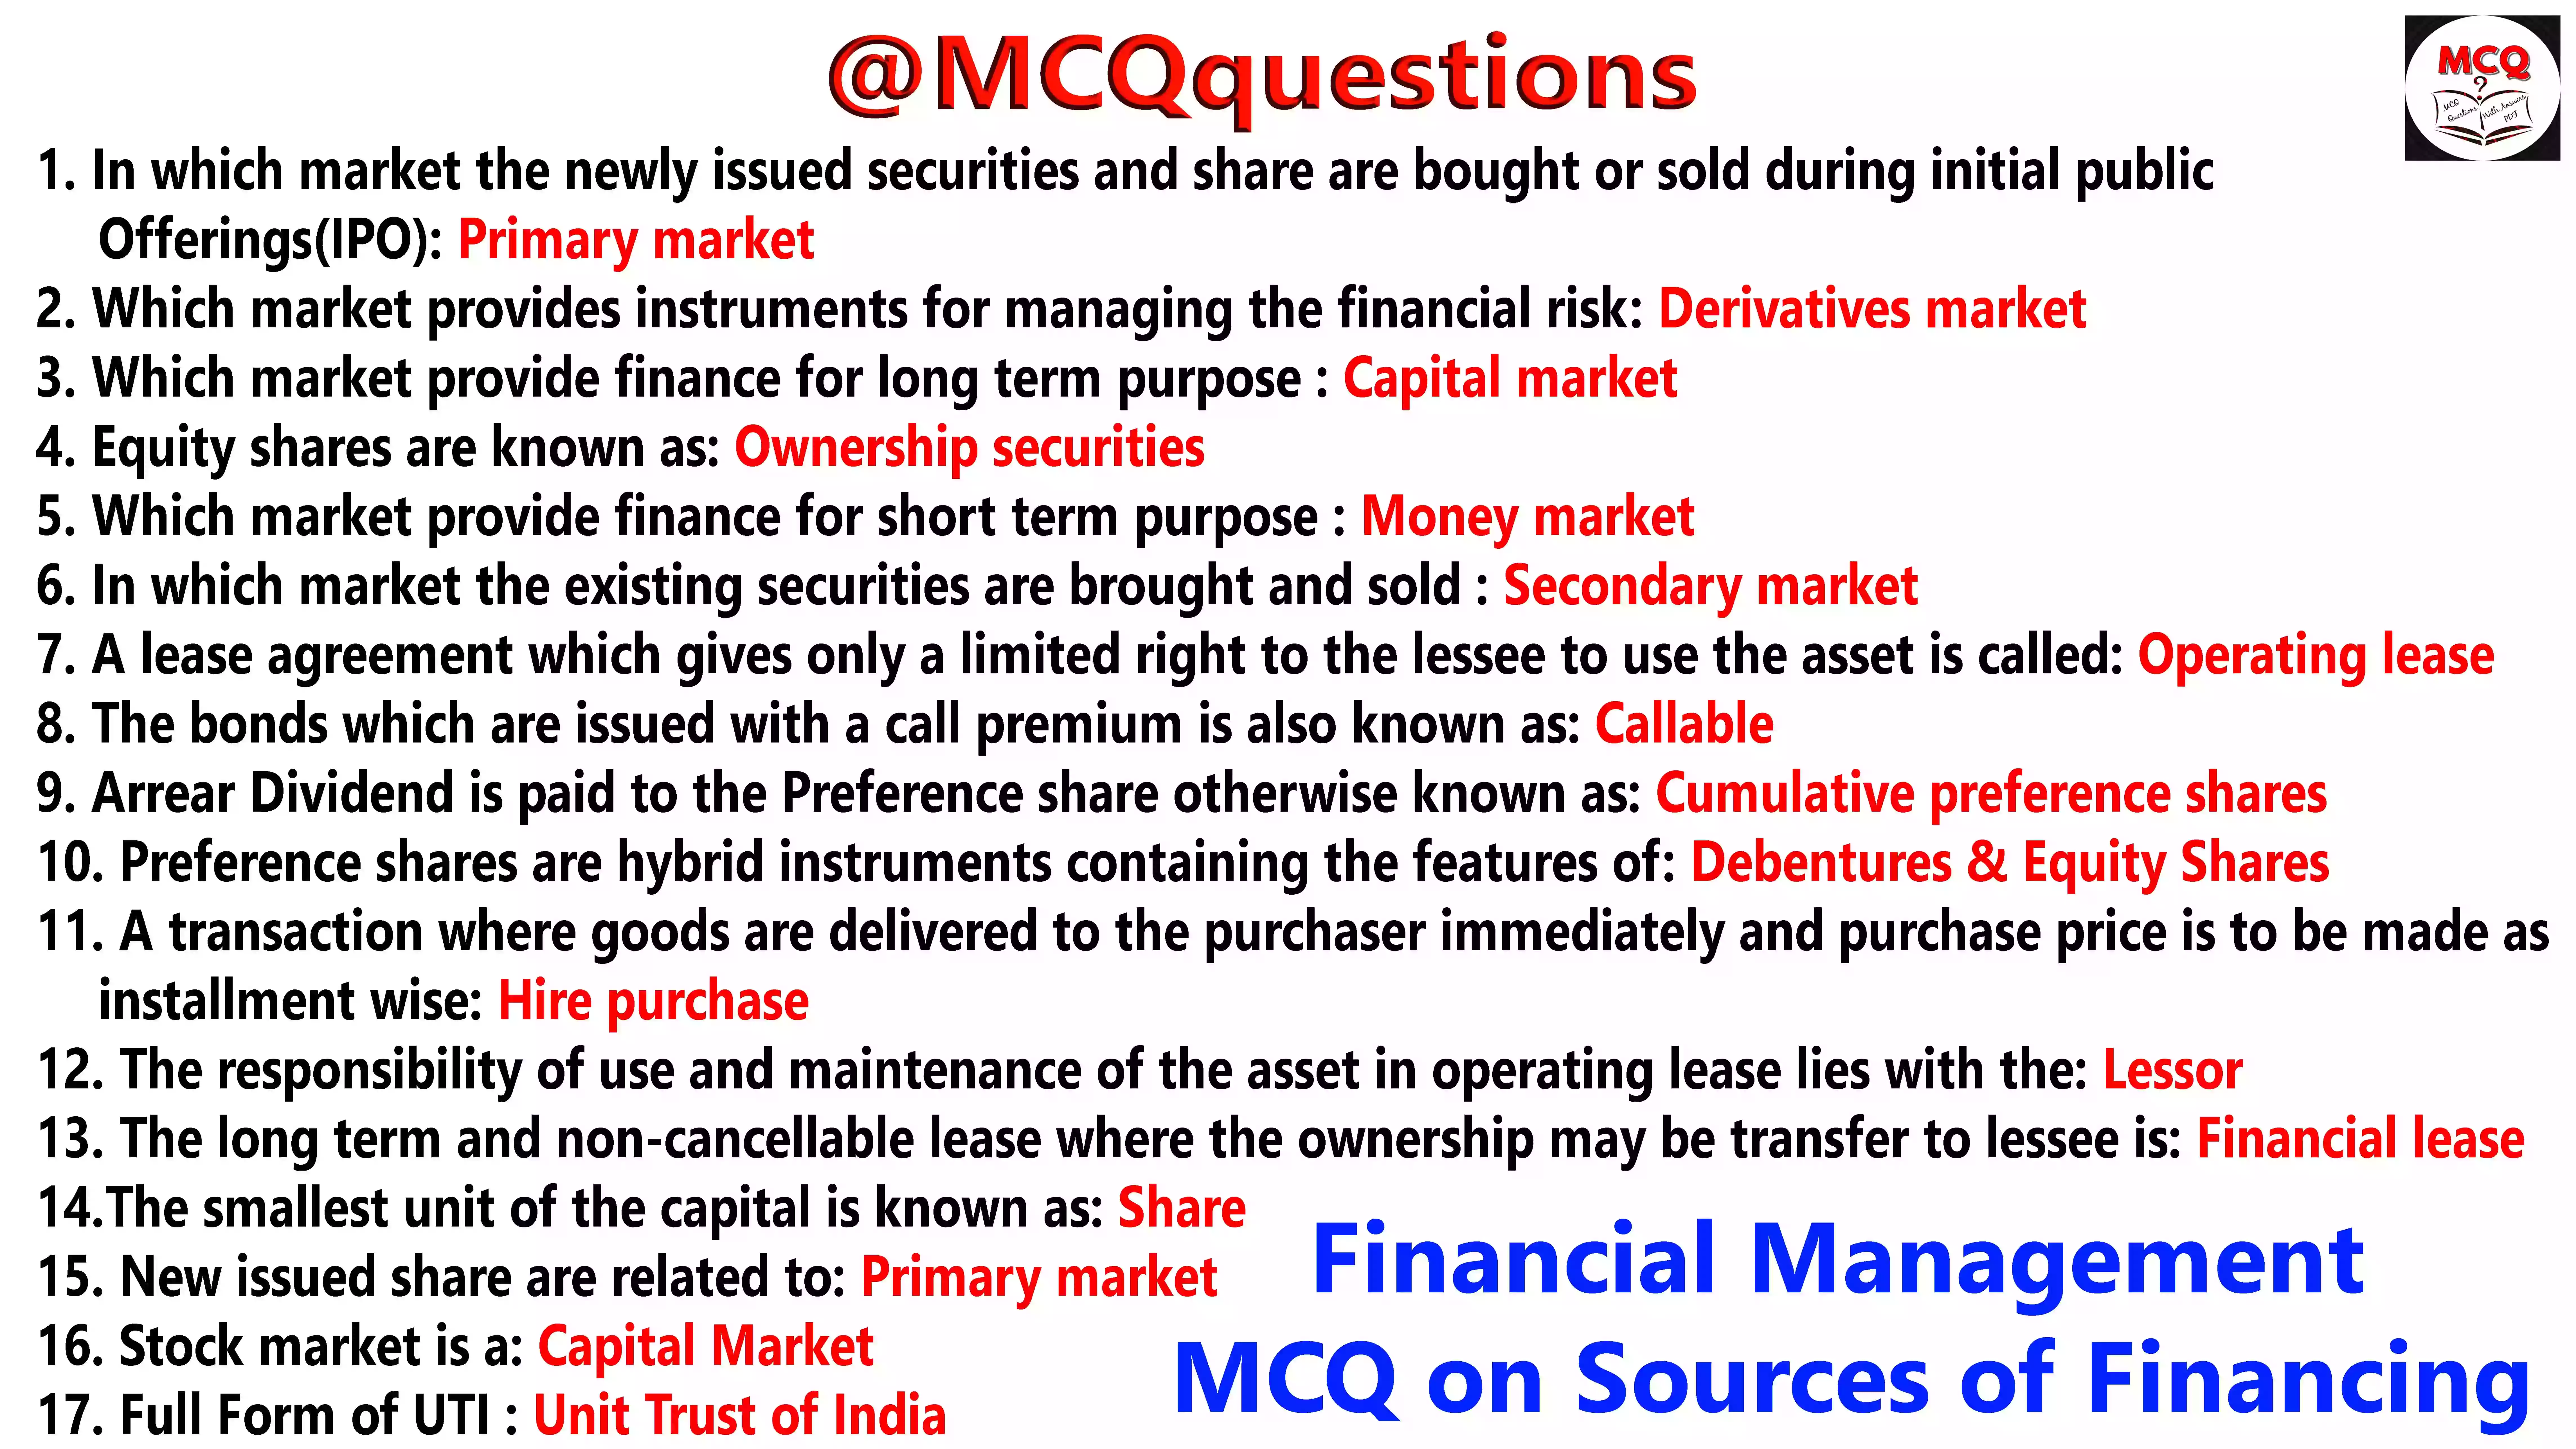 Financial Management MCQ on Sources of Financing